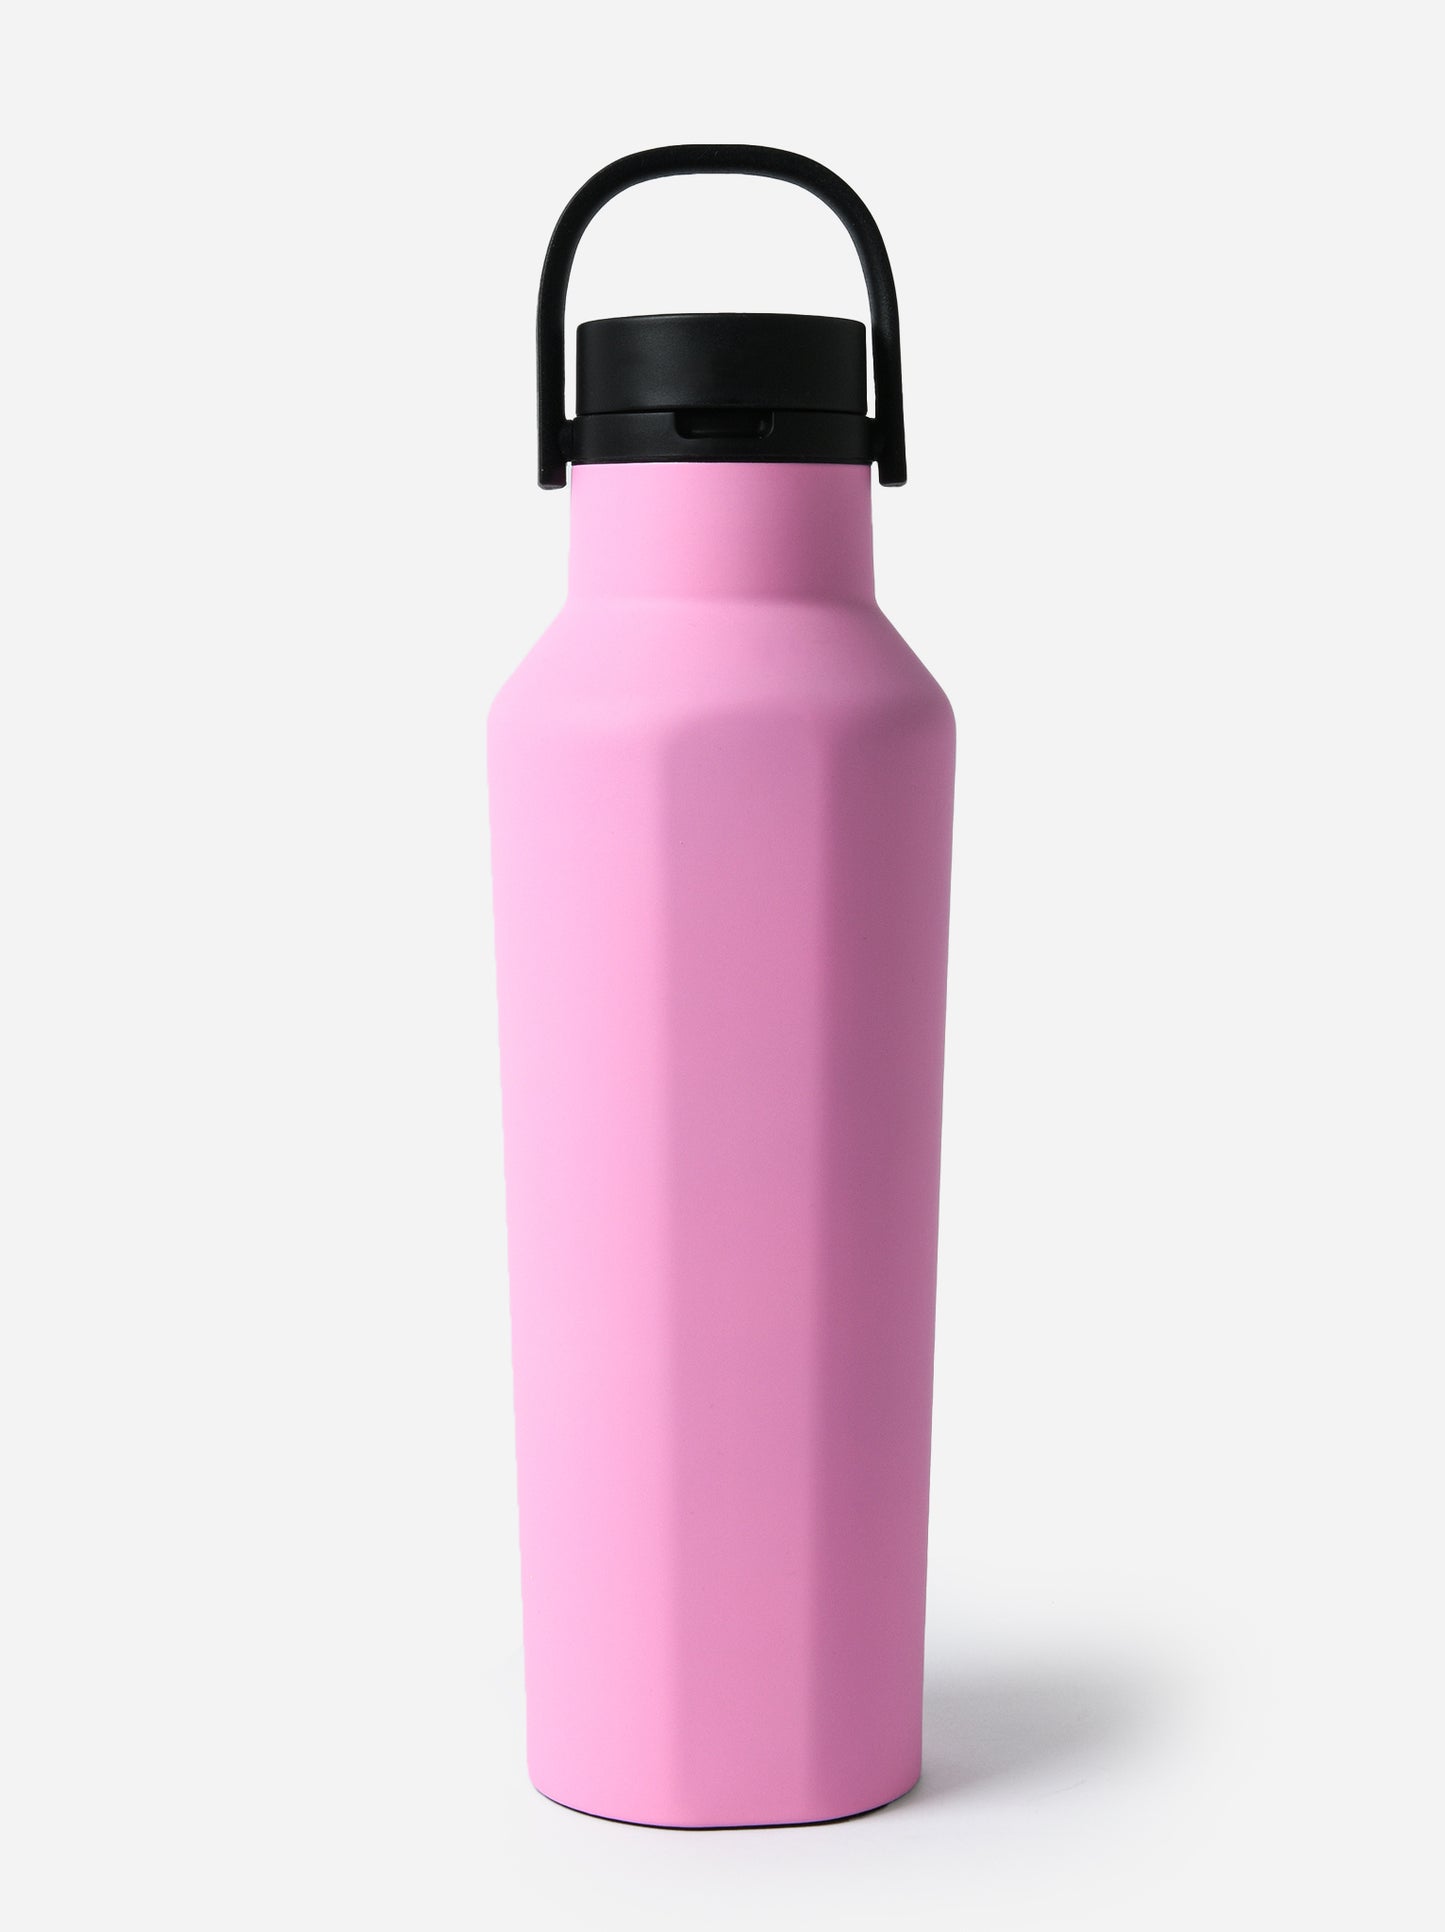 Corkcicle Series A Sport Canteen